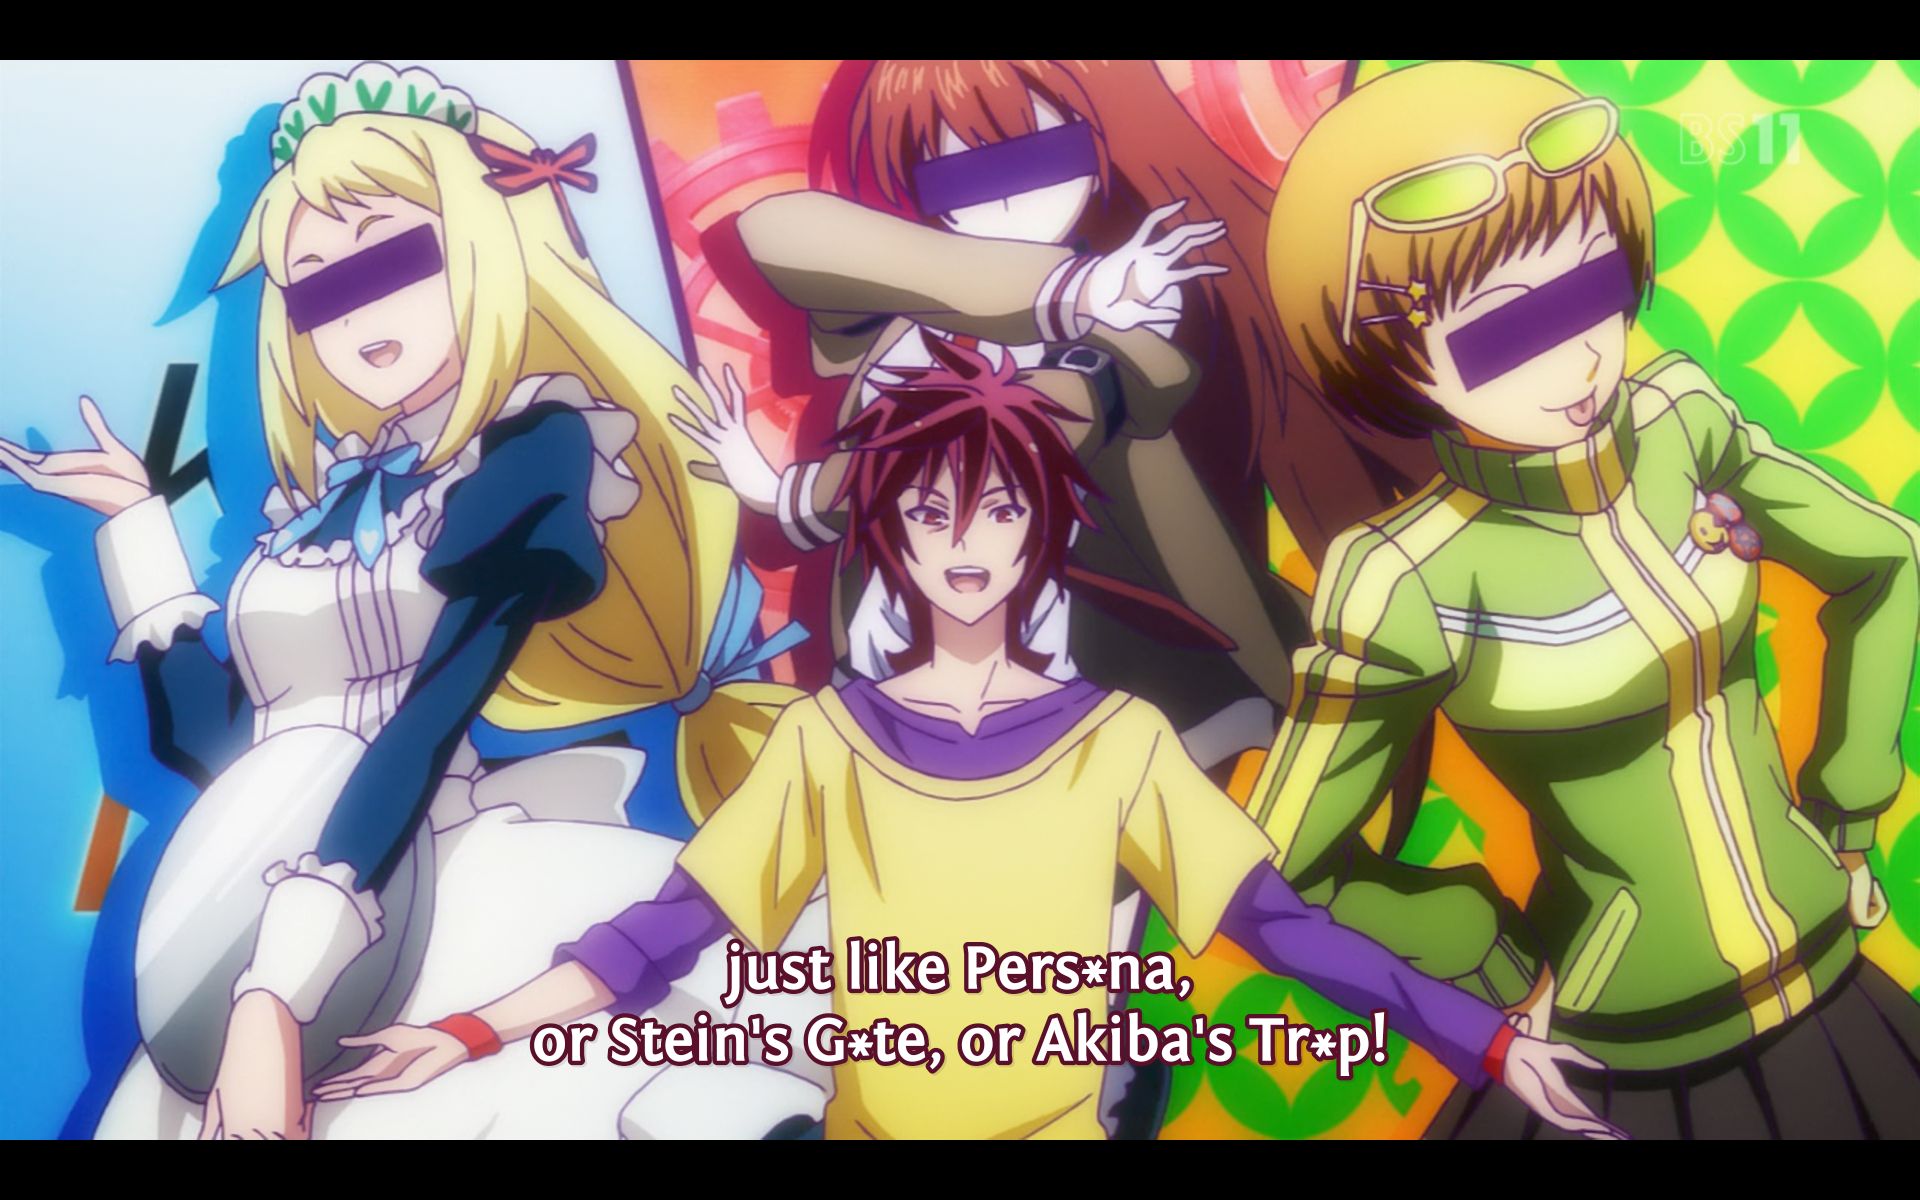 Some of the parodies in this anime.